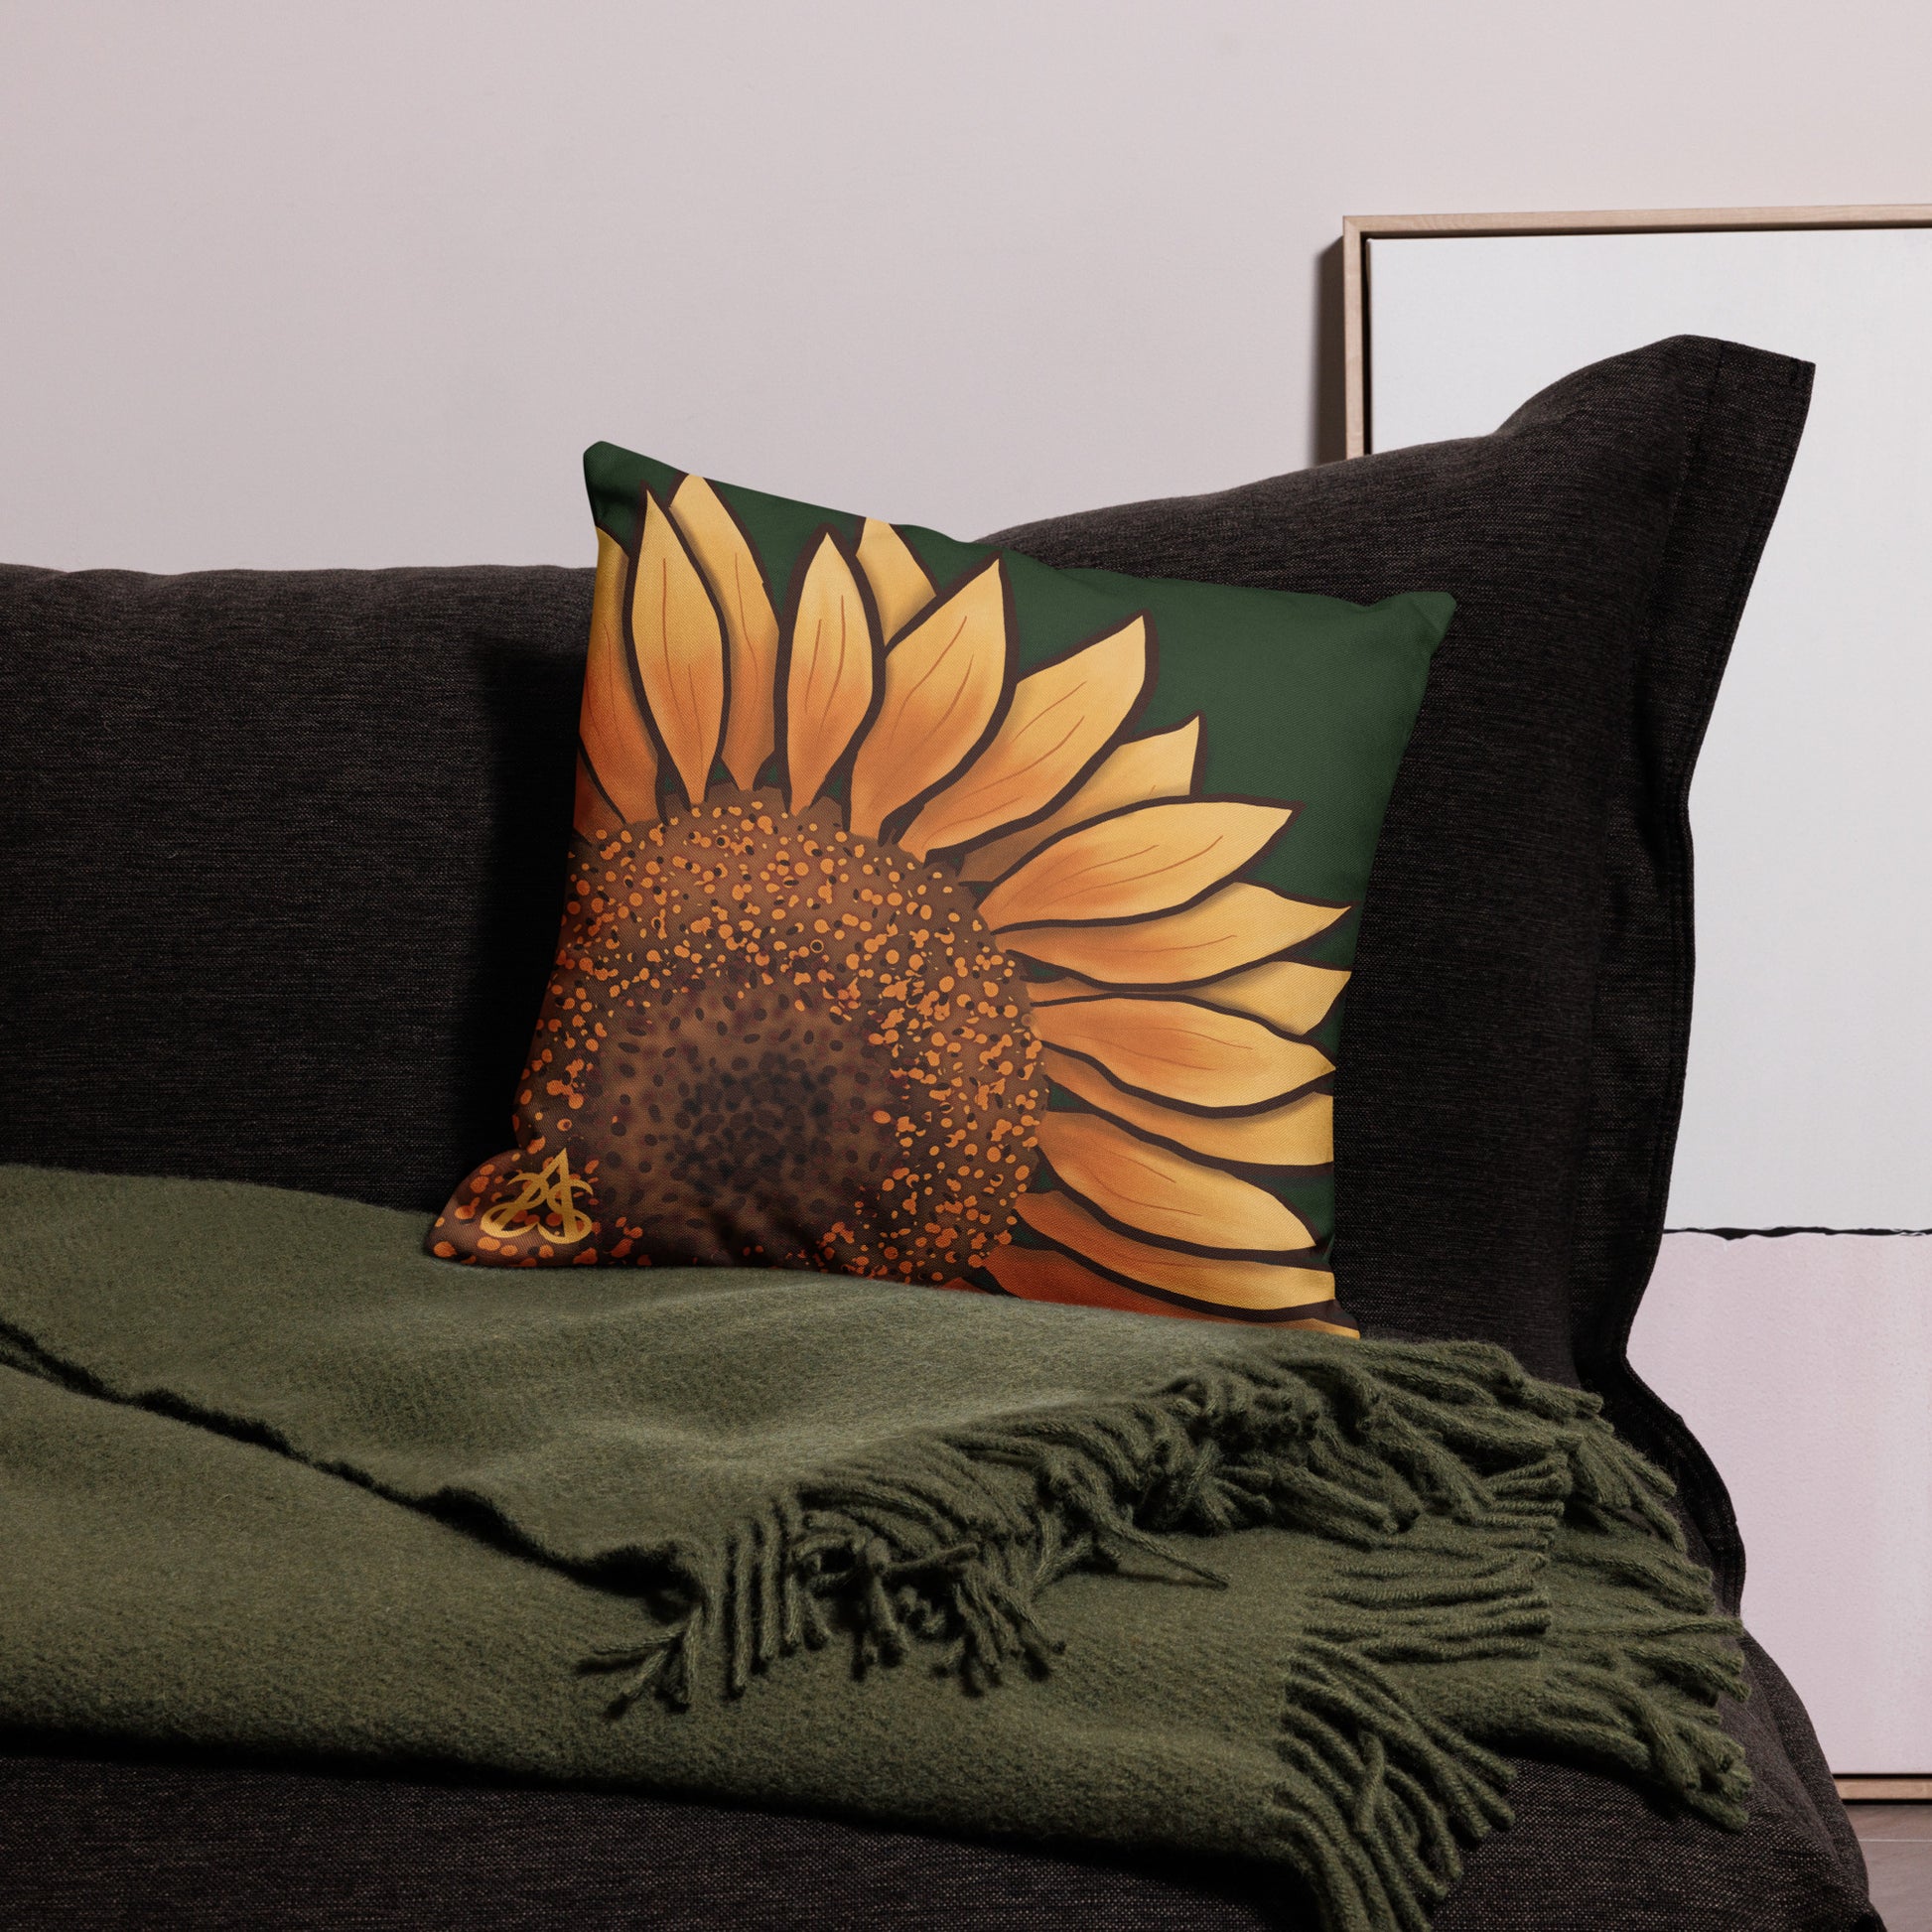 A medium sized square pillow with a hand painted sunflower by Aras Sivad on a dark green background.